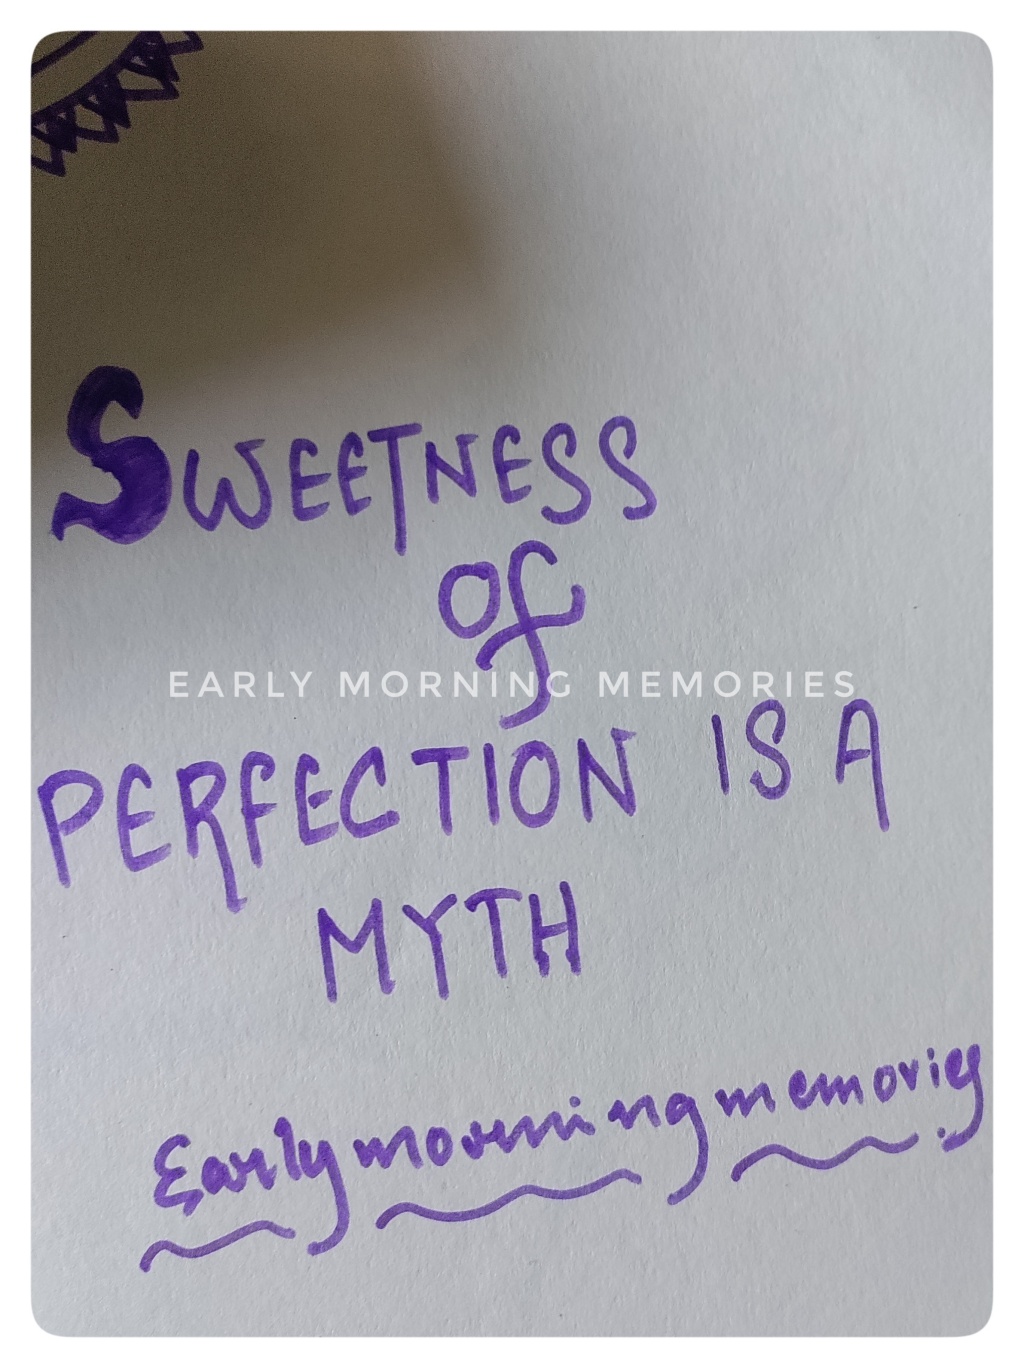 Sweetness of perfection is a Myth